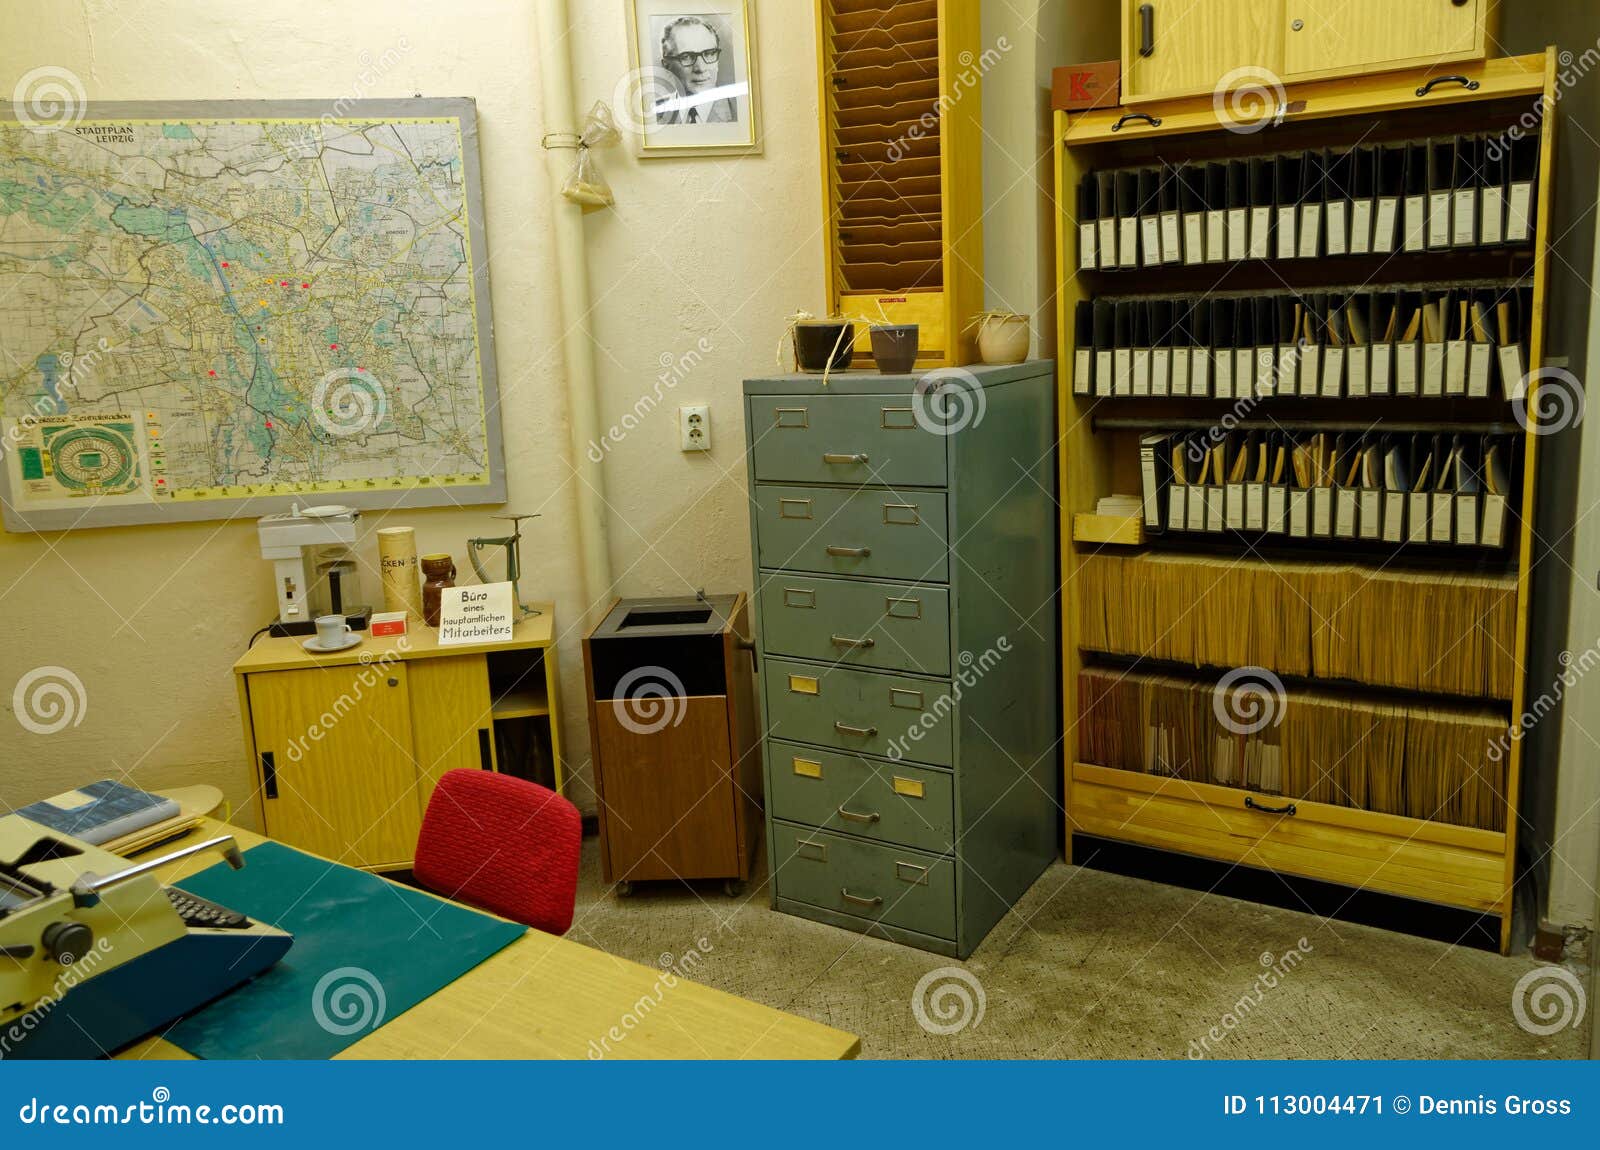 Stasi Museum Presents An Office Interior Of The Senior Officials